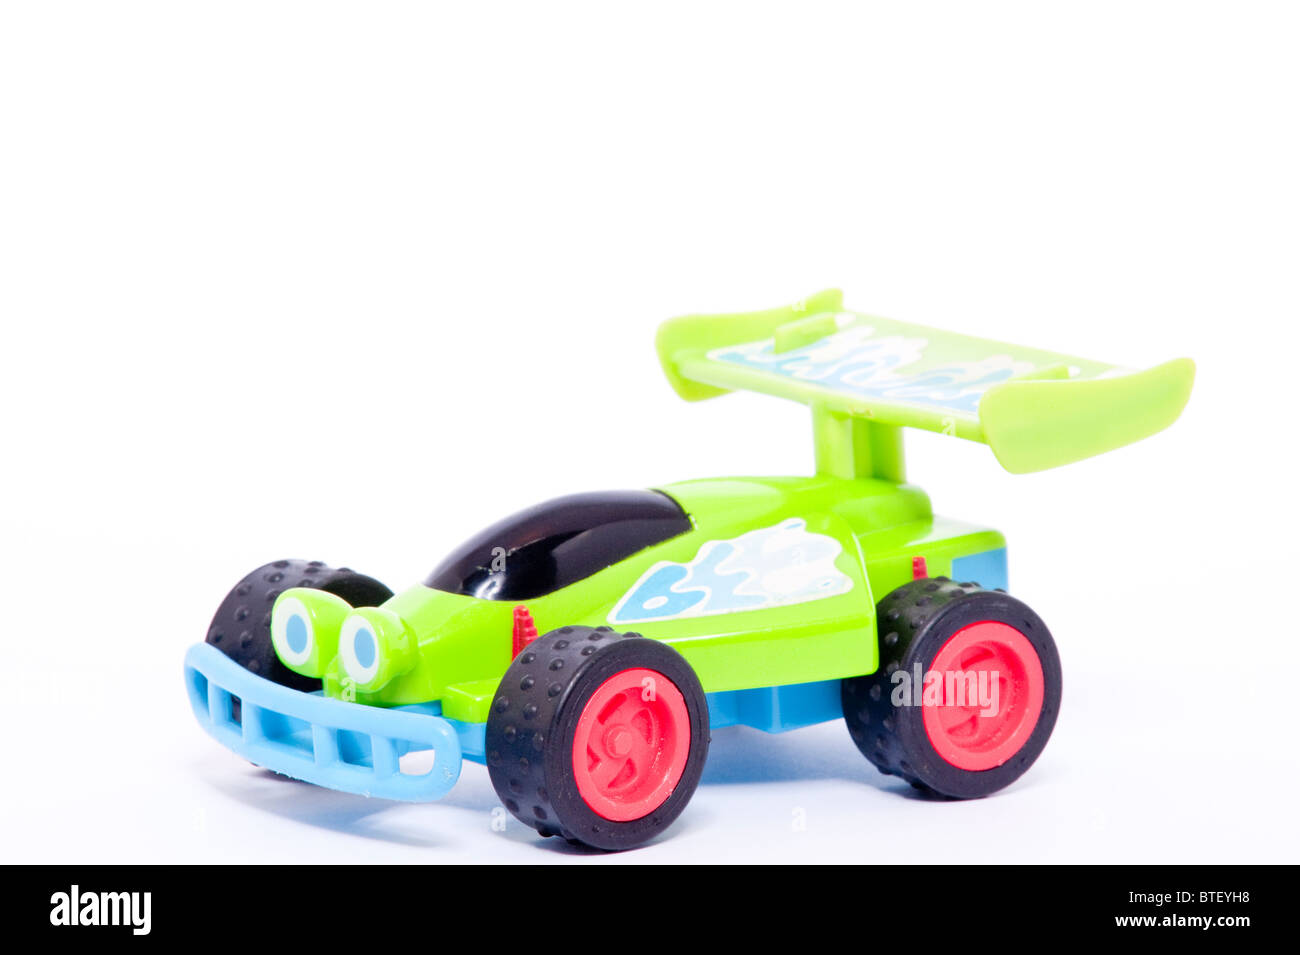 A close up photo of a childs toy RC car buggy from the Toy Story films against a white background Stock Photo